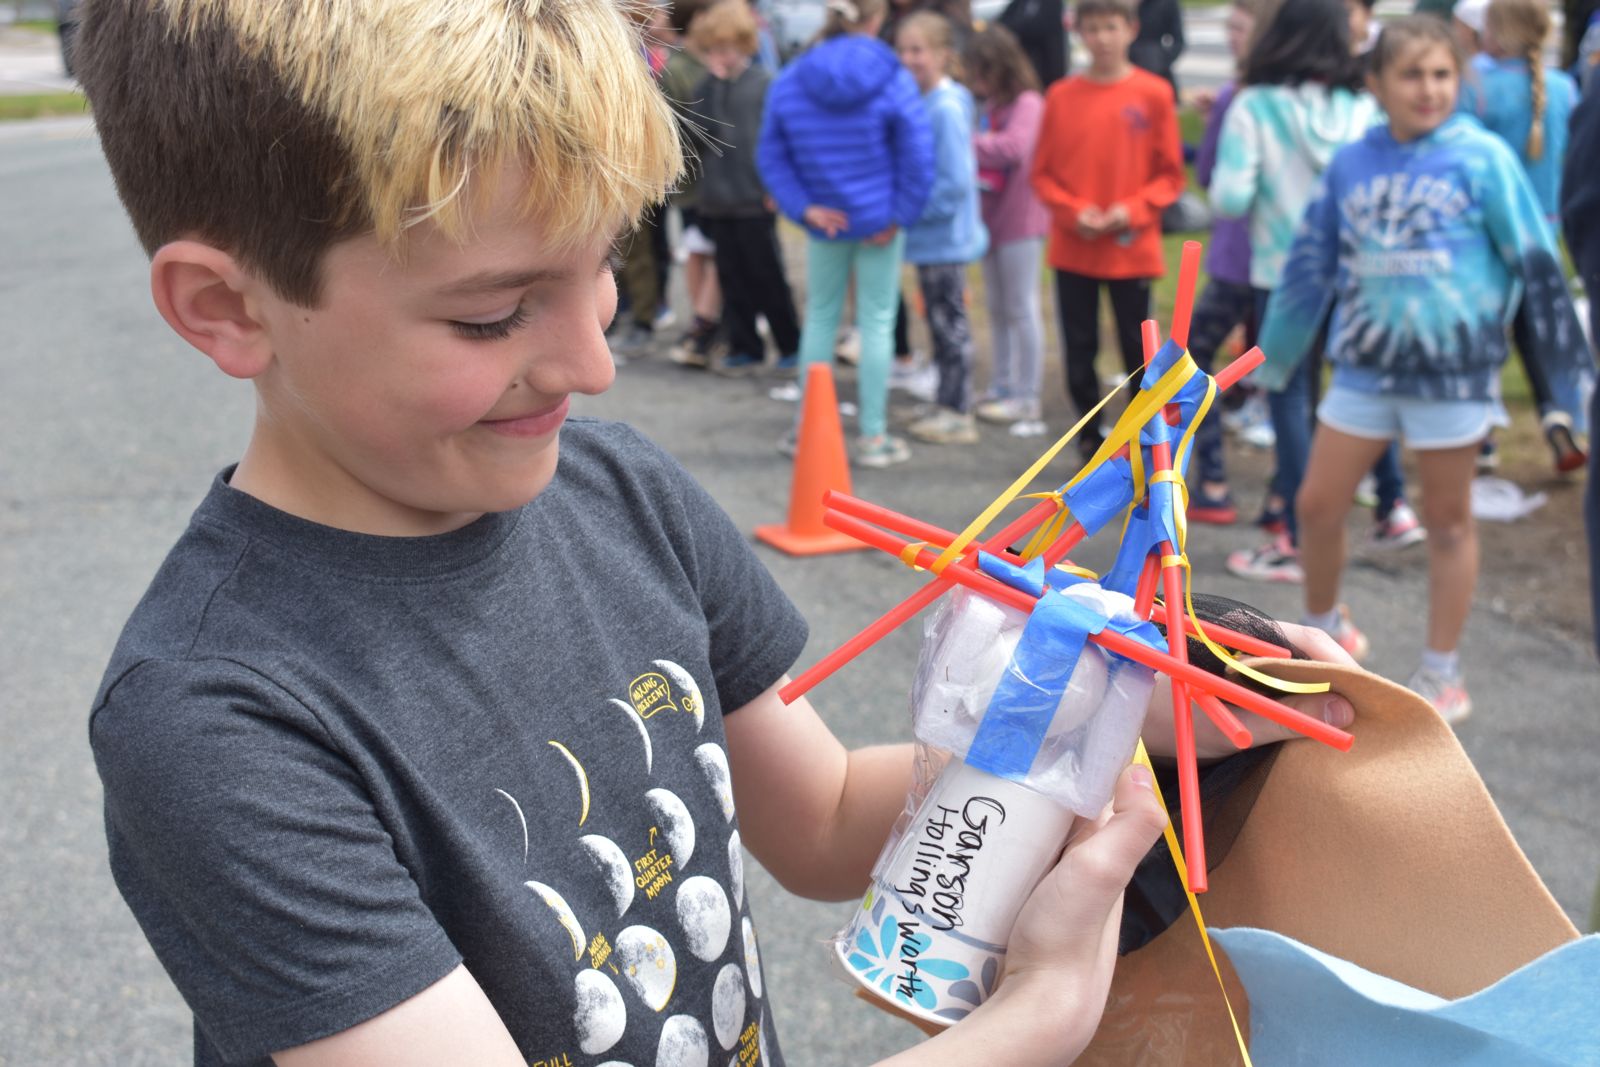 Student participates in egg drop competition